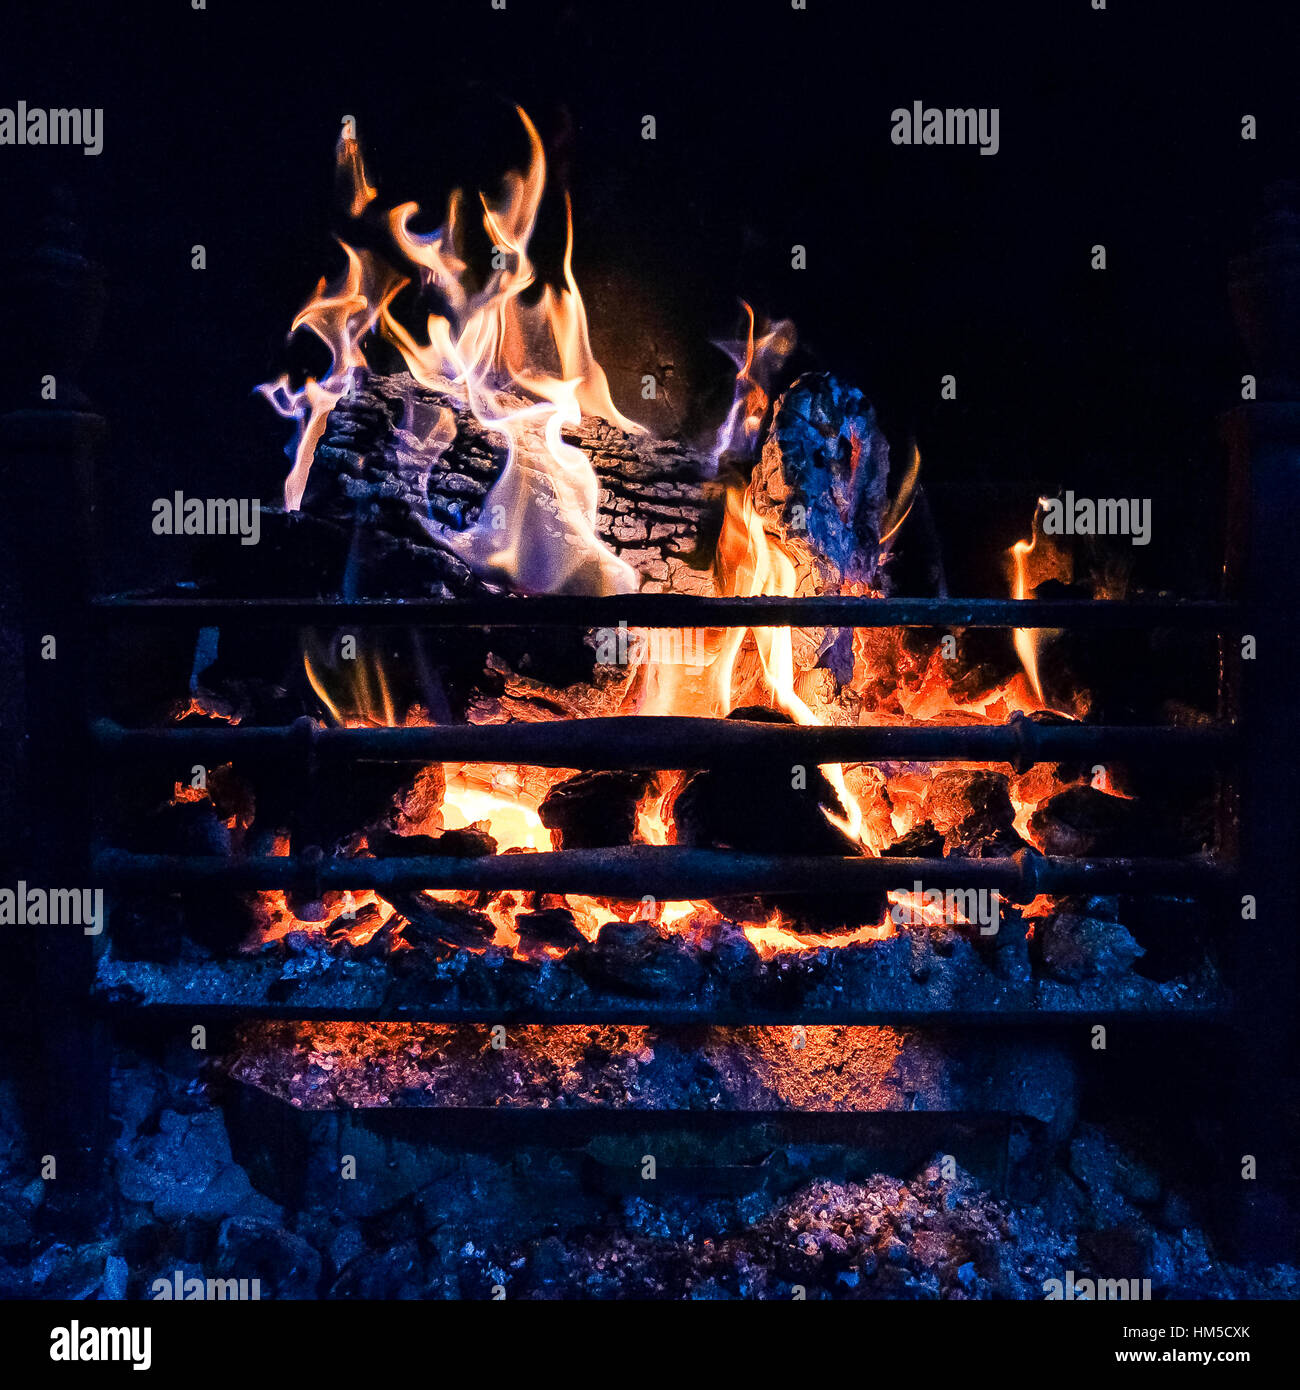 A close up fireplace showing logs and coal burning Stock Photo